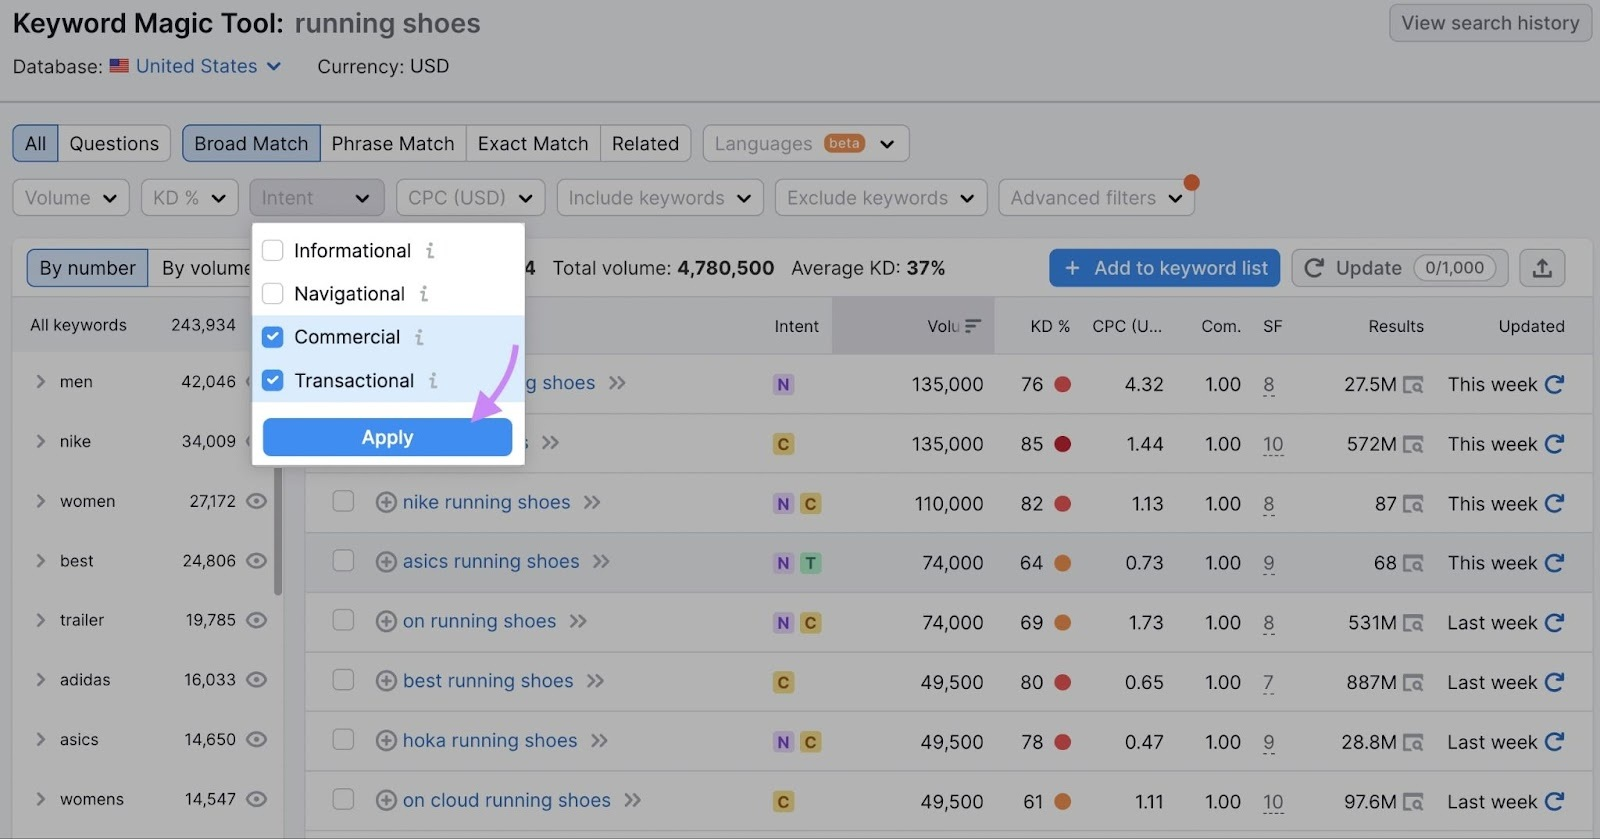 Filtering results for keywords that have "commercial" and "transactional" search intent in the Keyword Magic Tool